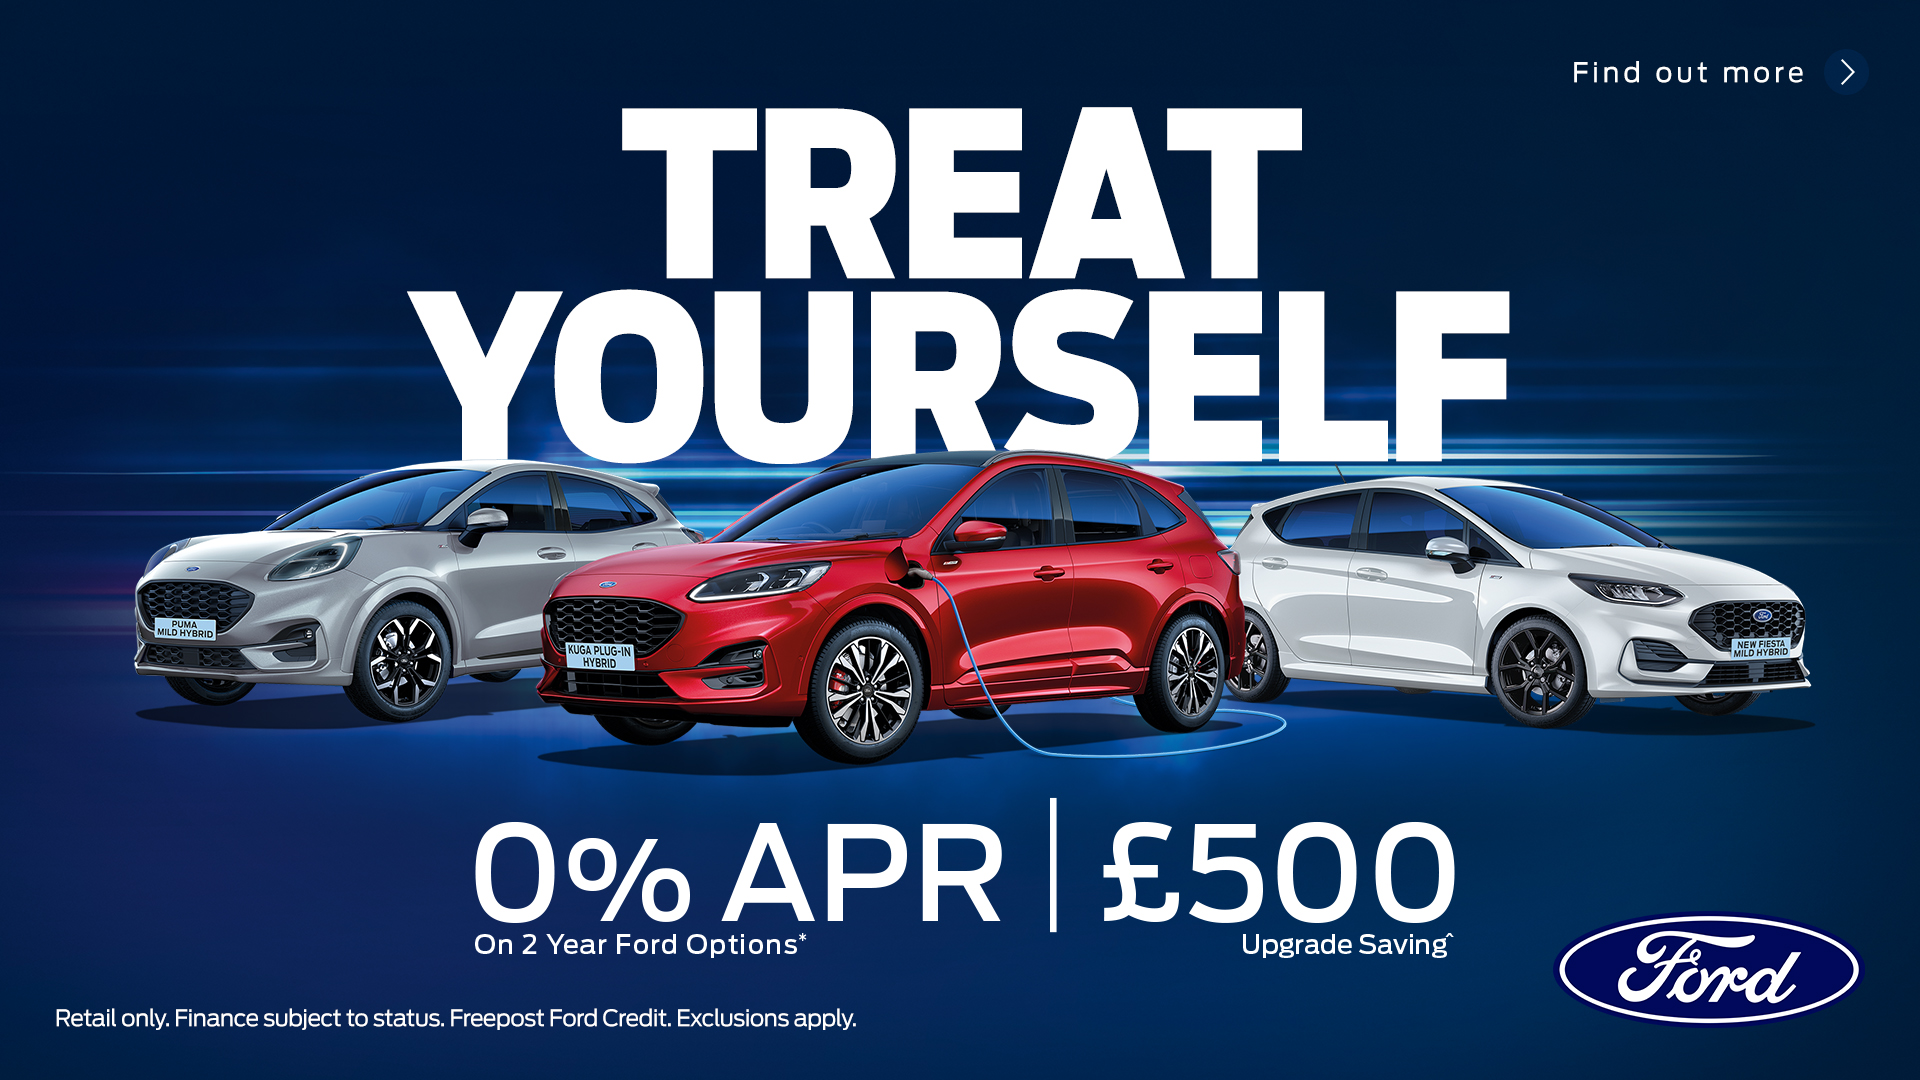 Treat yourself with 0% APR and £500 upgrade offer